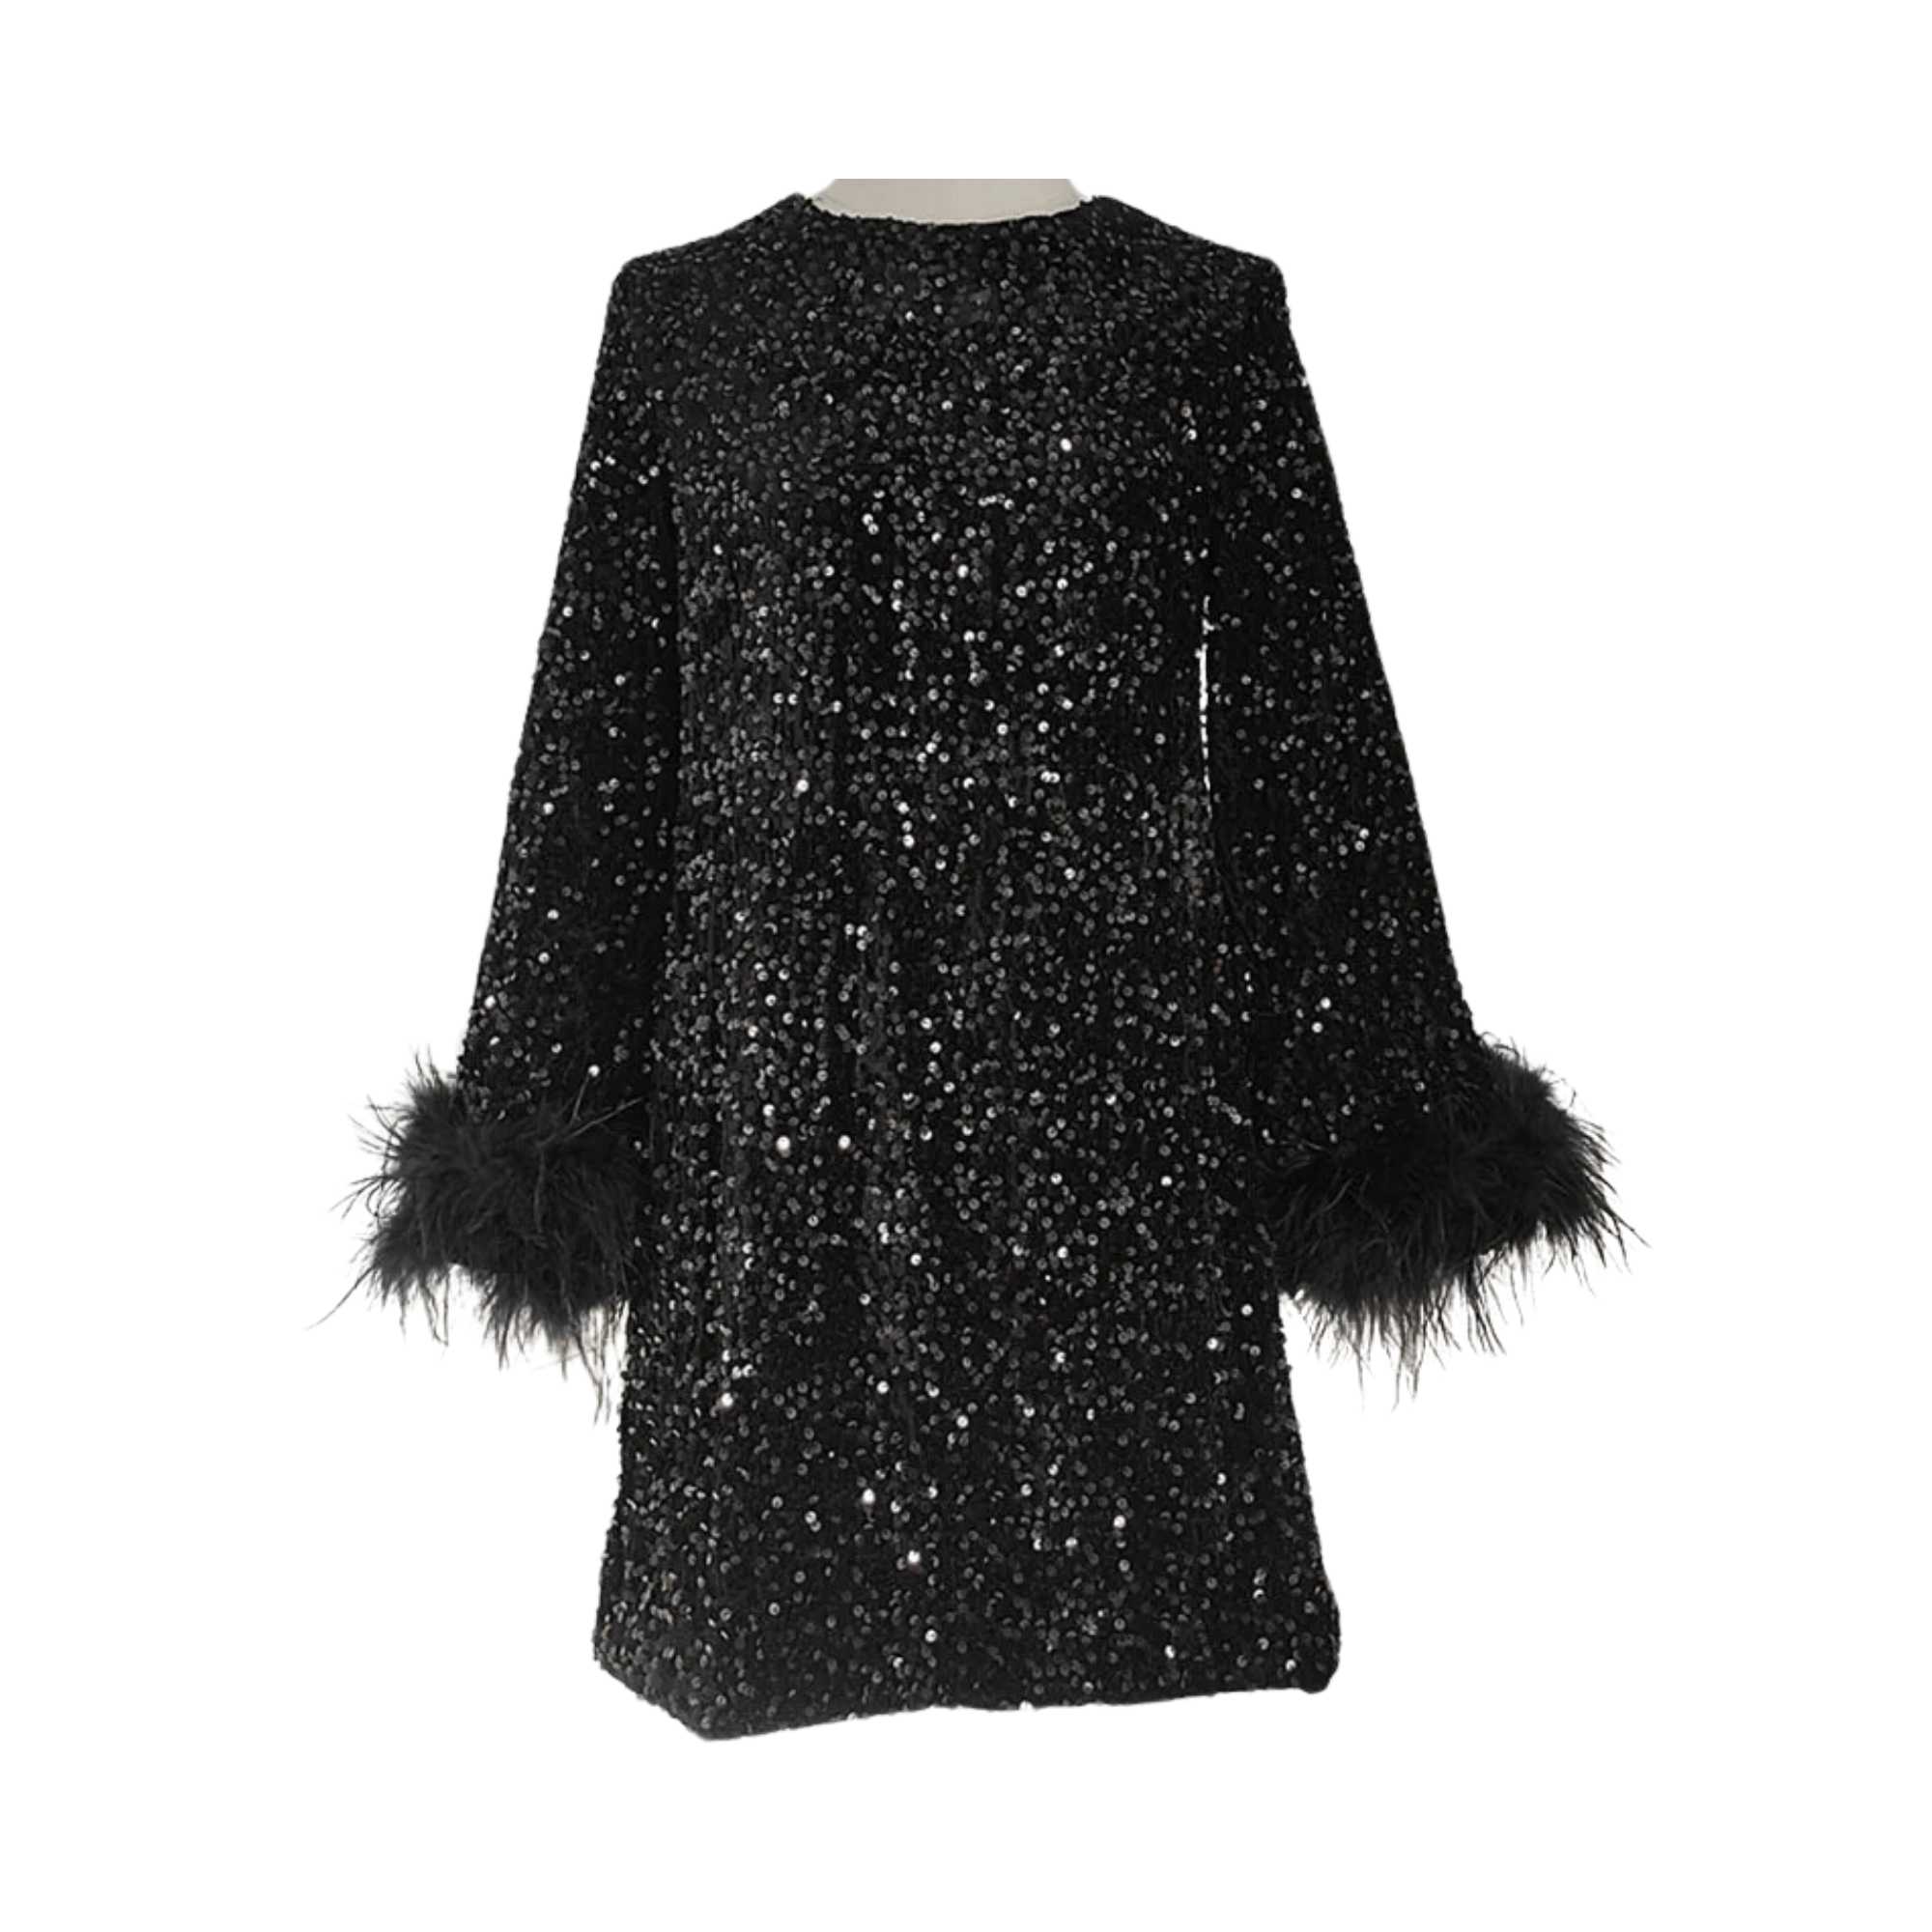 Feathered Cuffs Sequined Dress - Kelly Obi New York